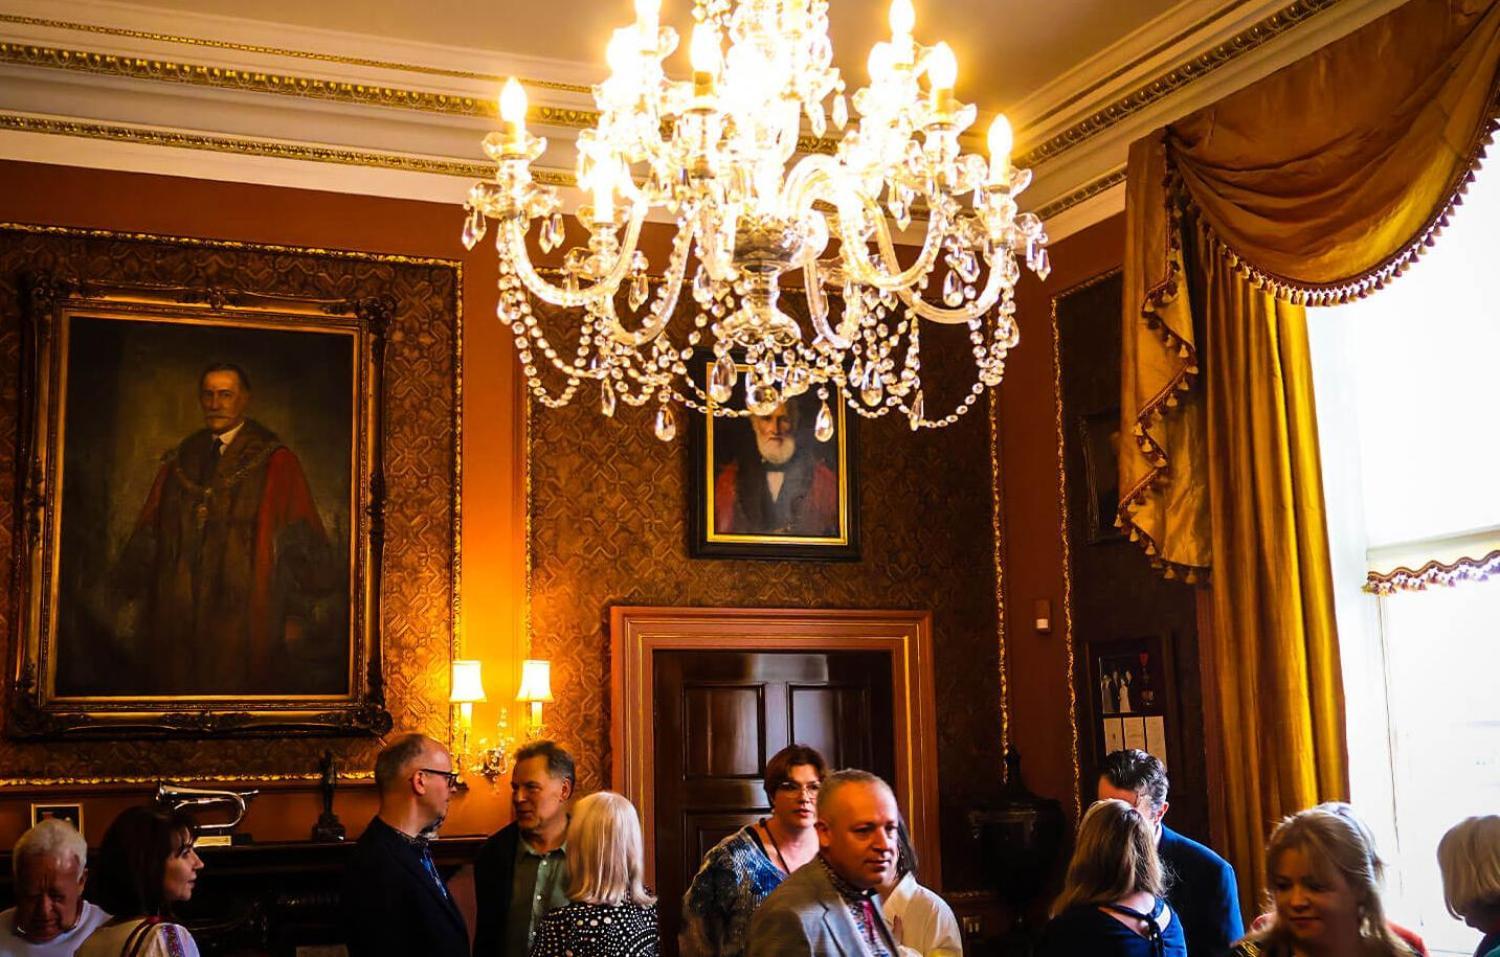 A grand room with paintings on the wall filled with people, with a large chandelier over the top of their heads